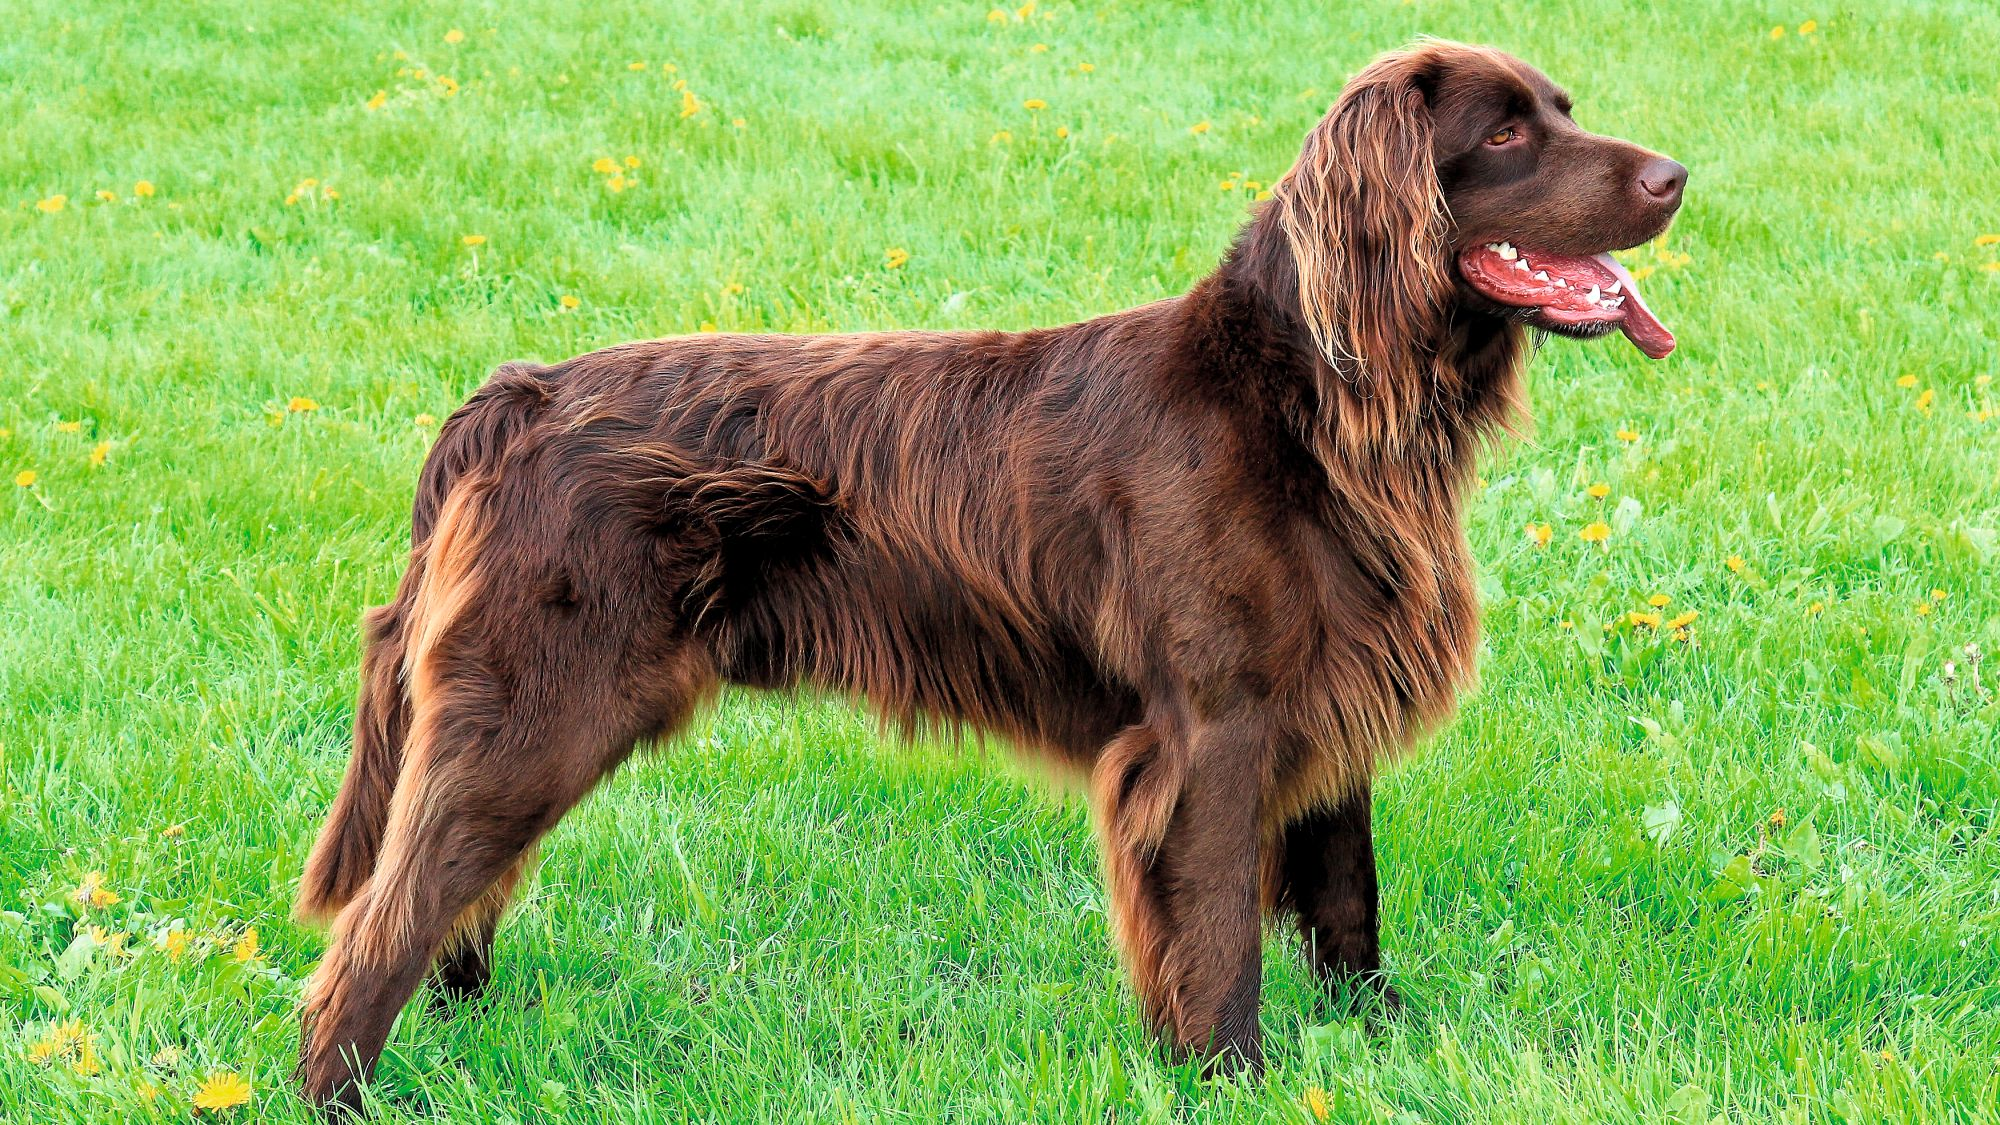 German Longhaired Pointing Hound stood facing to the side on grass